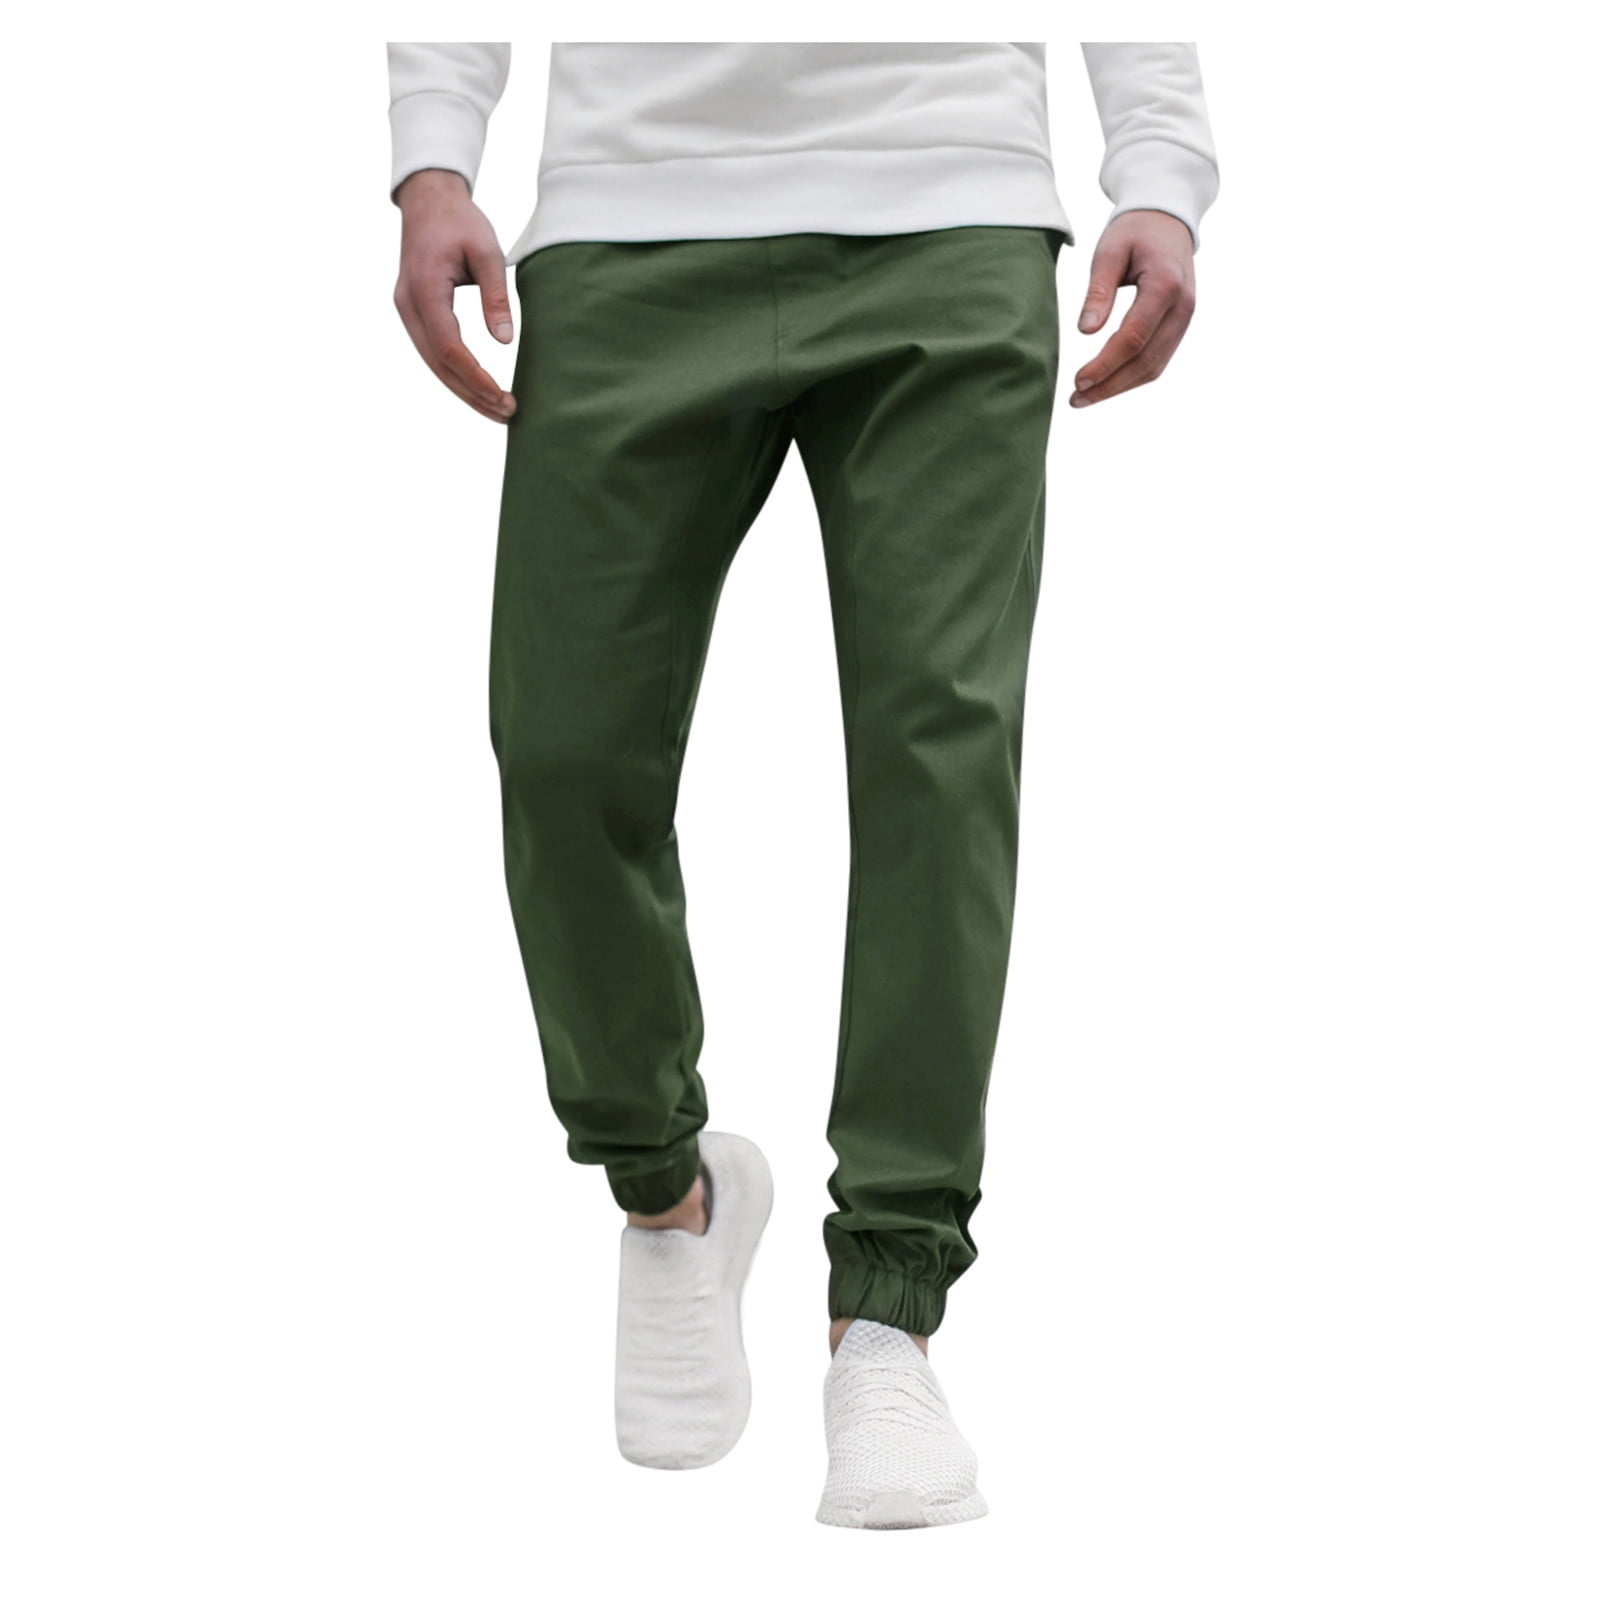 Aayomet Mens Sweatpants With Pockets Powerblend , Ankle Jogger Sweatpants  for Men,Green L